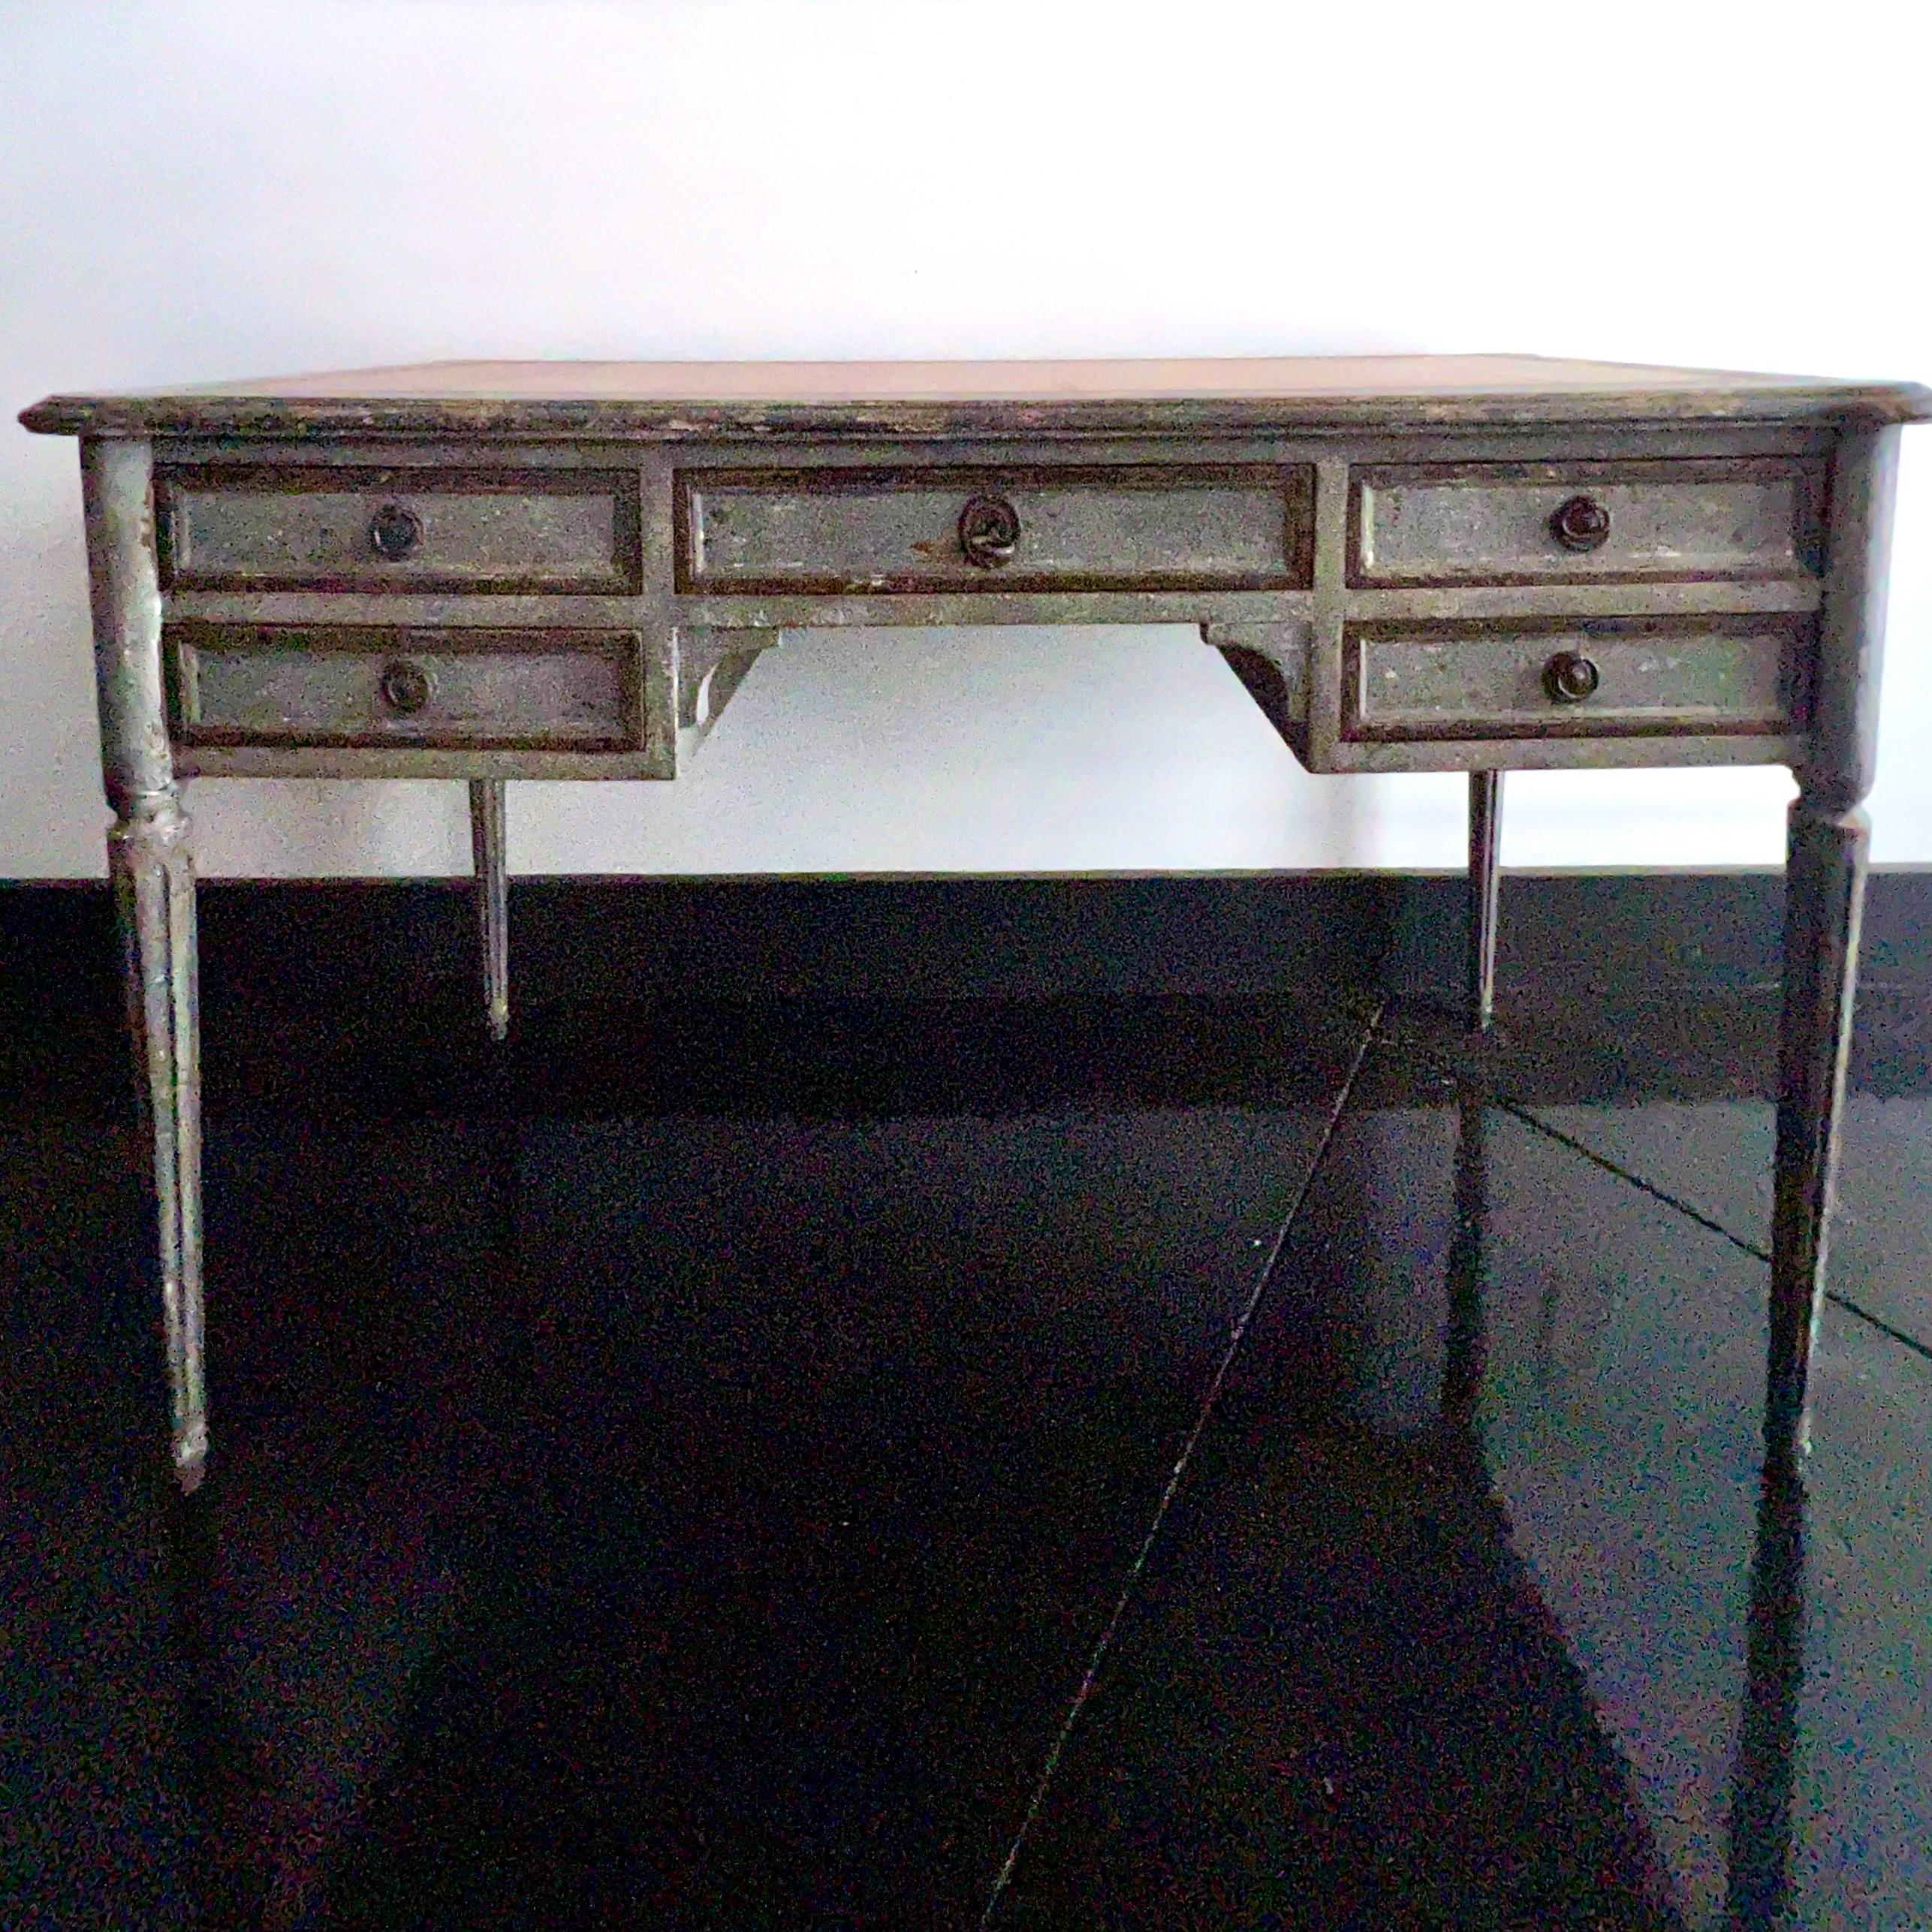 Elegant 19th century French Louis XVI style Bureaux plat with drawers in gray/blue finish. Leather top with nicely stamped and gold leafed embossing design. The back of the desk is trimmed to match the front in faux partner desk style.
Kneehole: